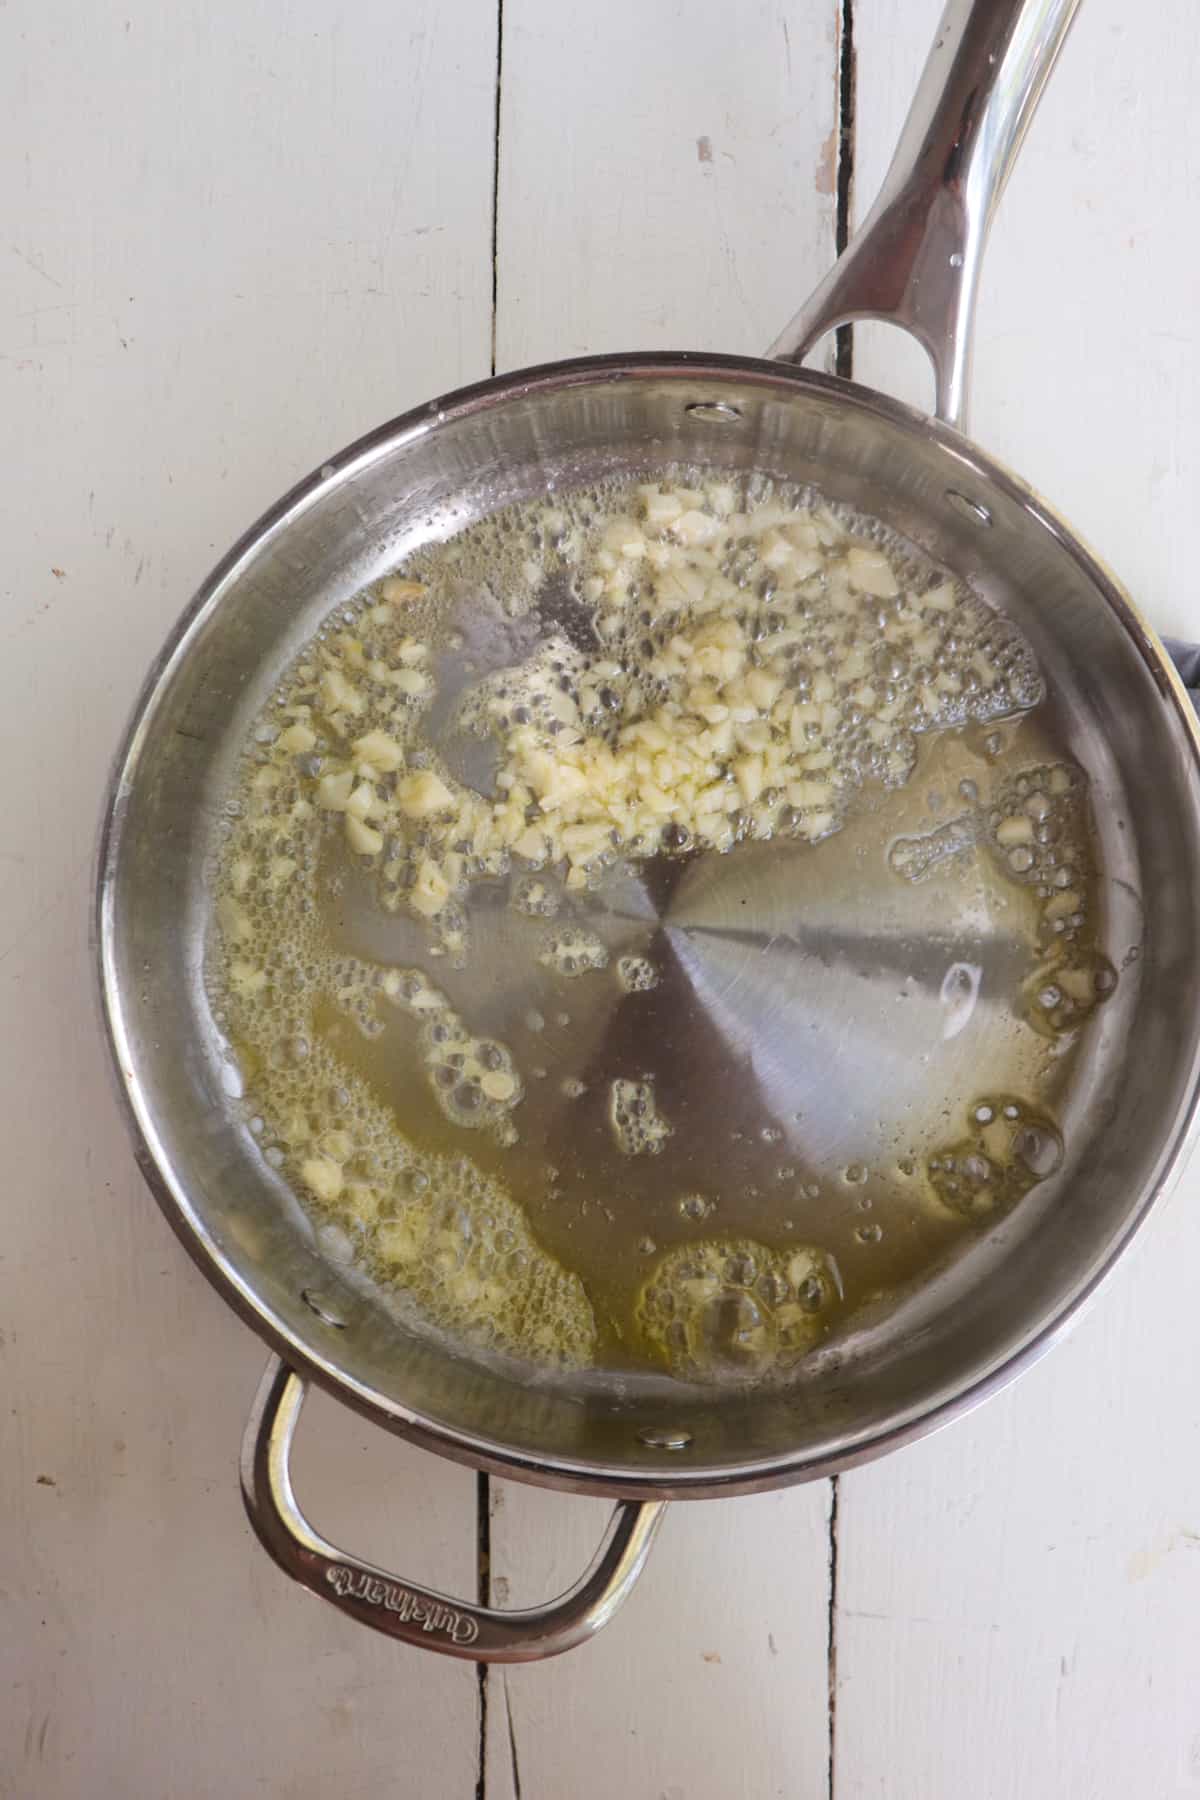 garlic sauteed in oil and butter.